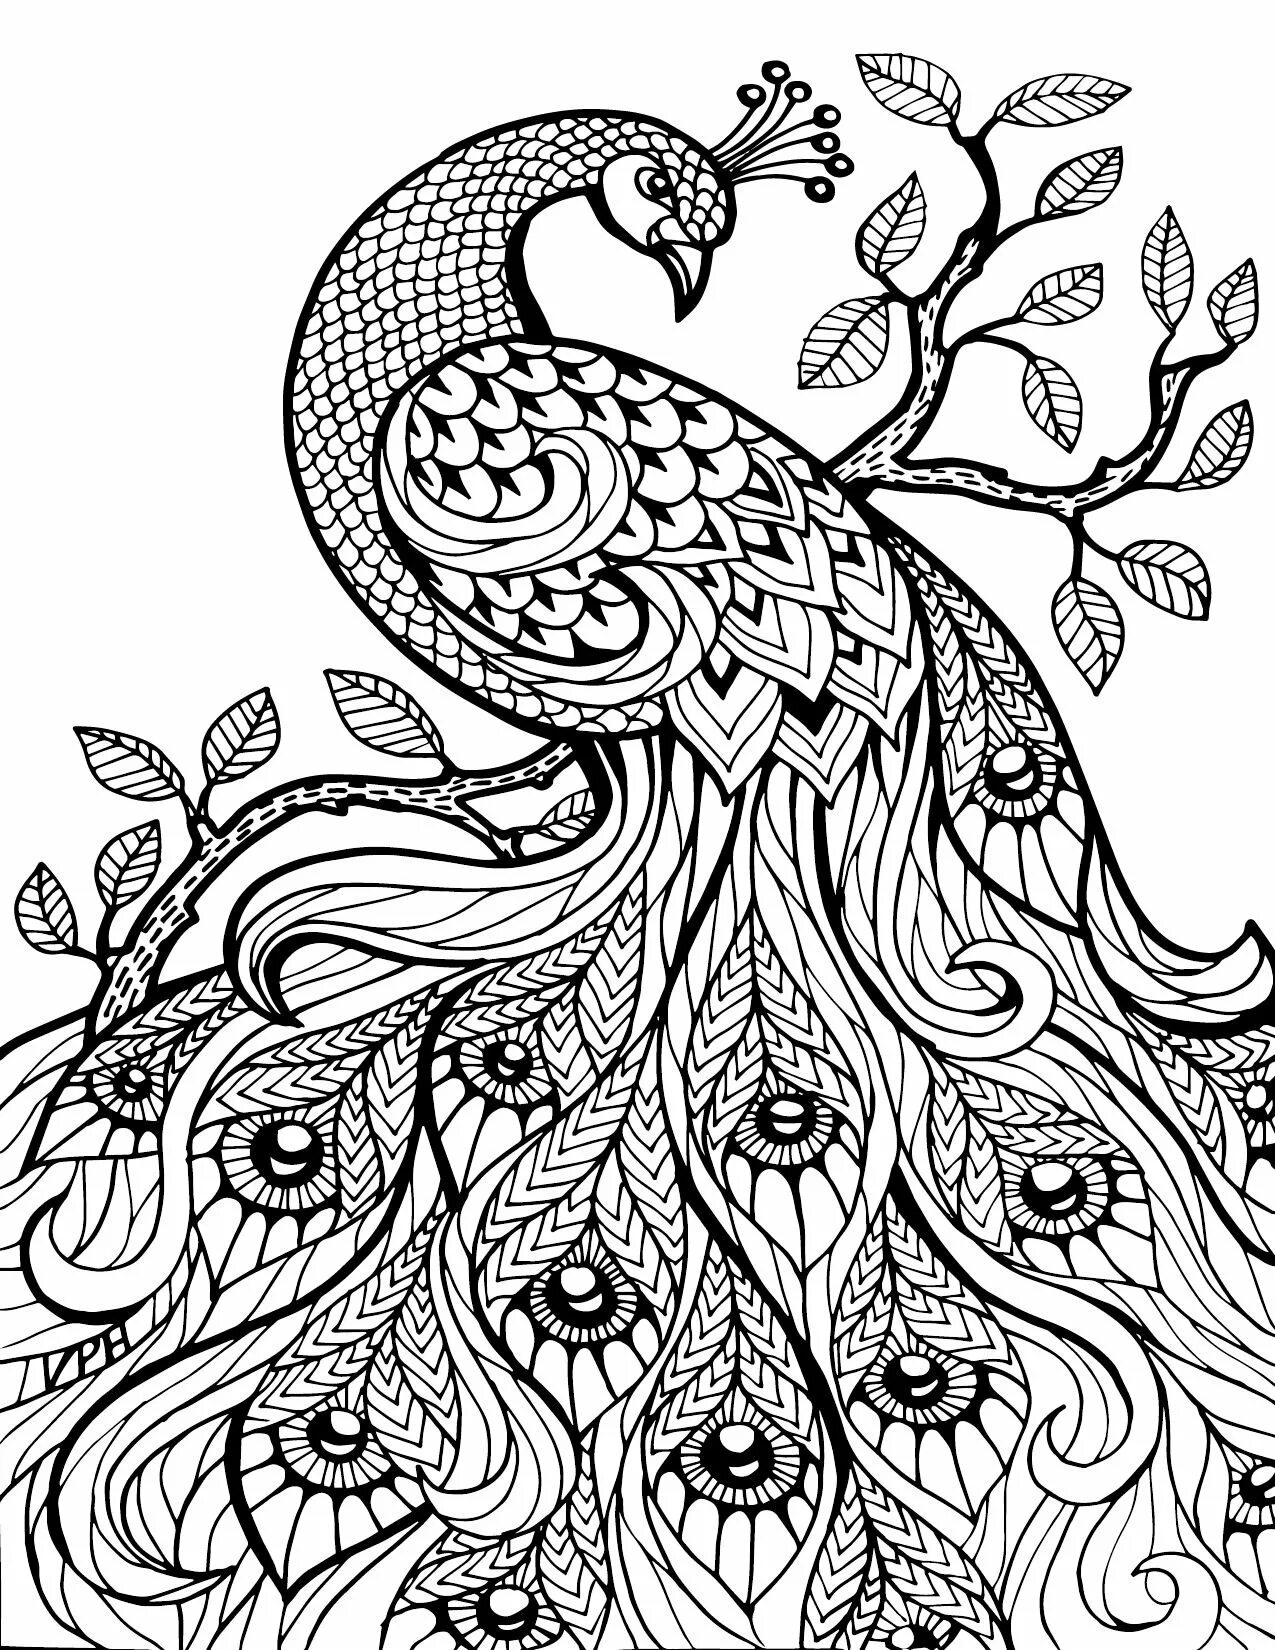 Refreshing coloring art therapy for adults